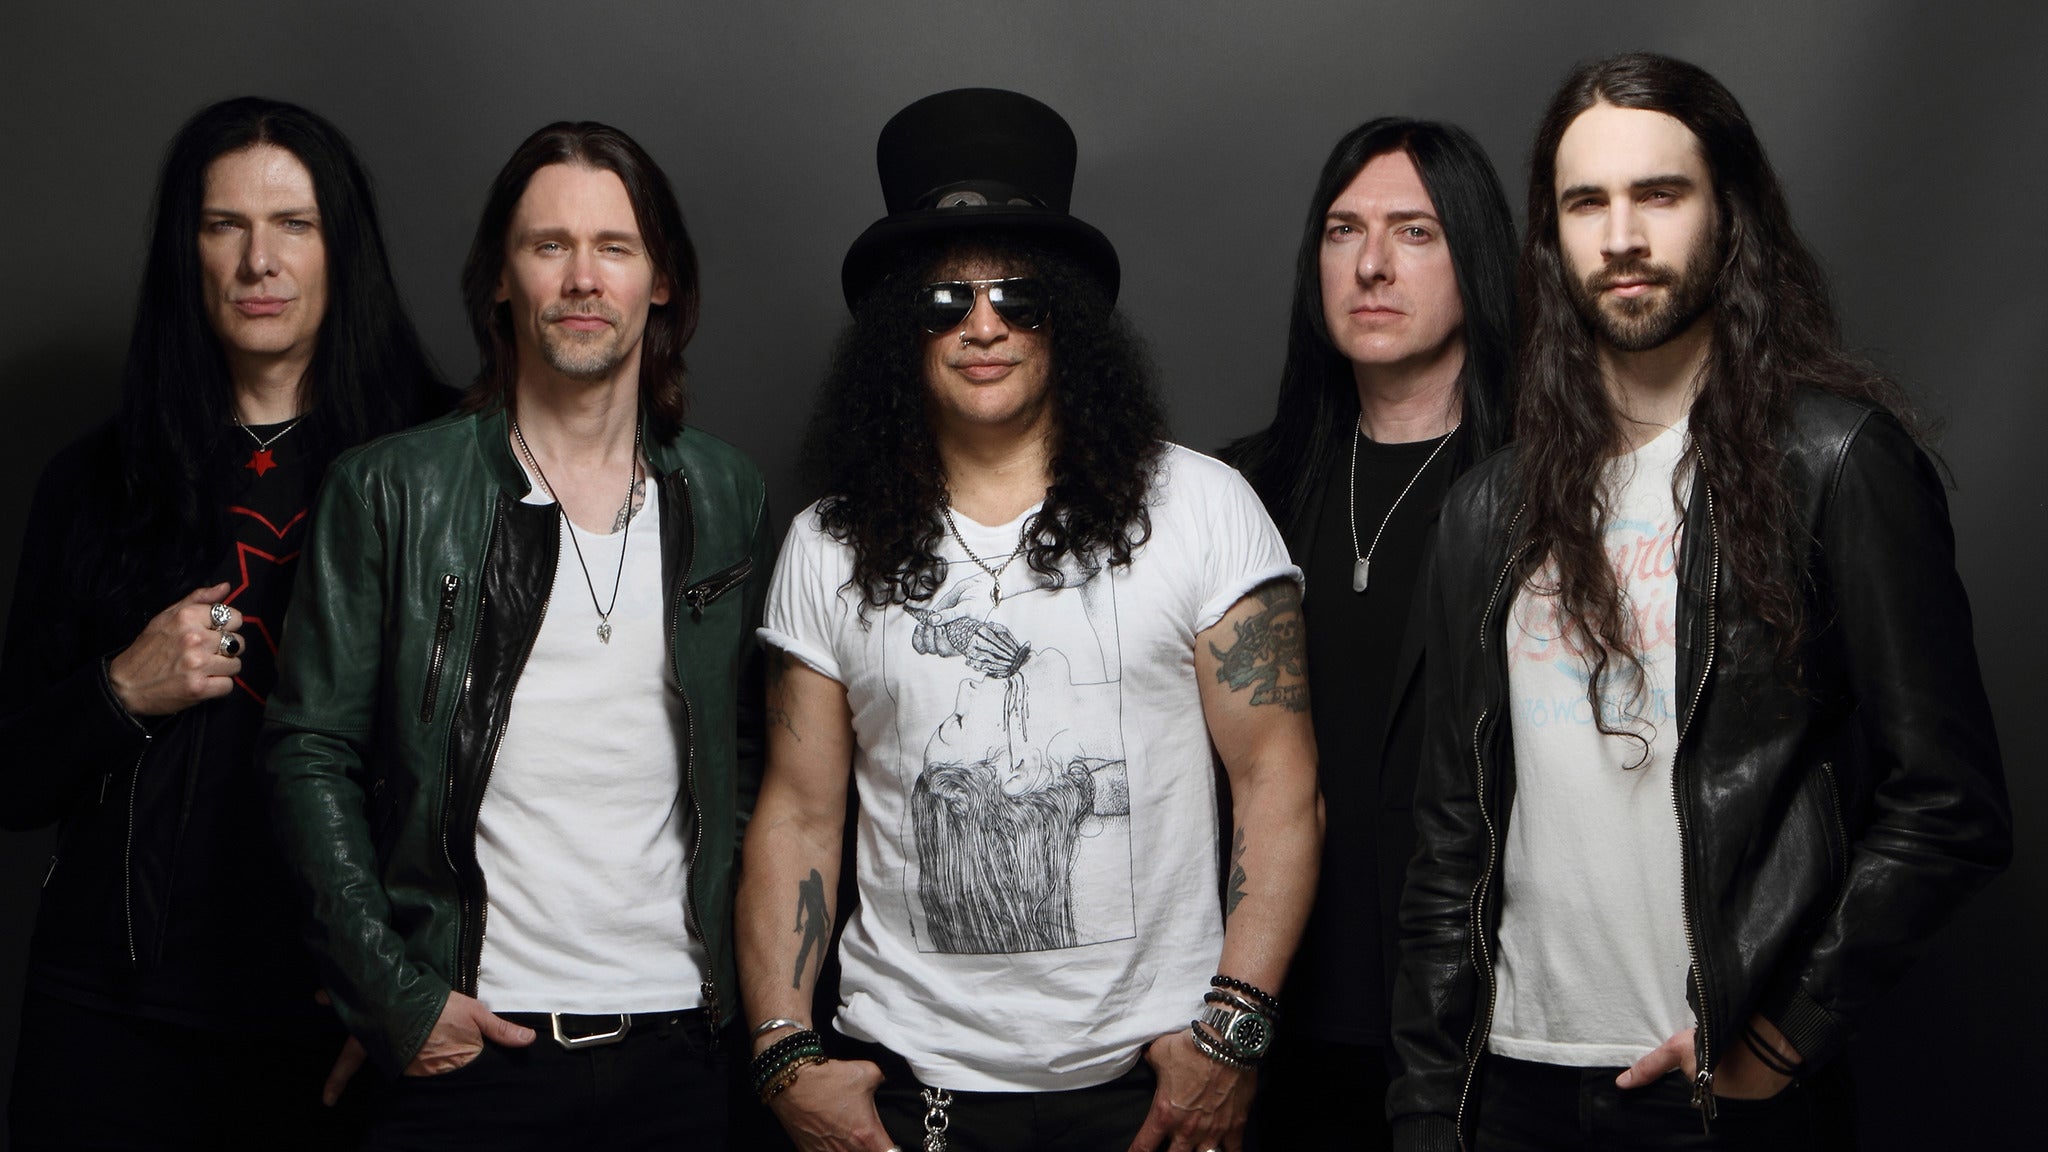 Slash ft. Myles Kennedy & The Conspirators - Living The Dream Tour '19 in Orlando promo photo for Spotify presale offer code